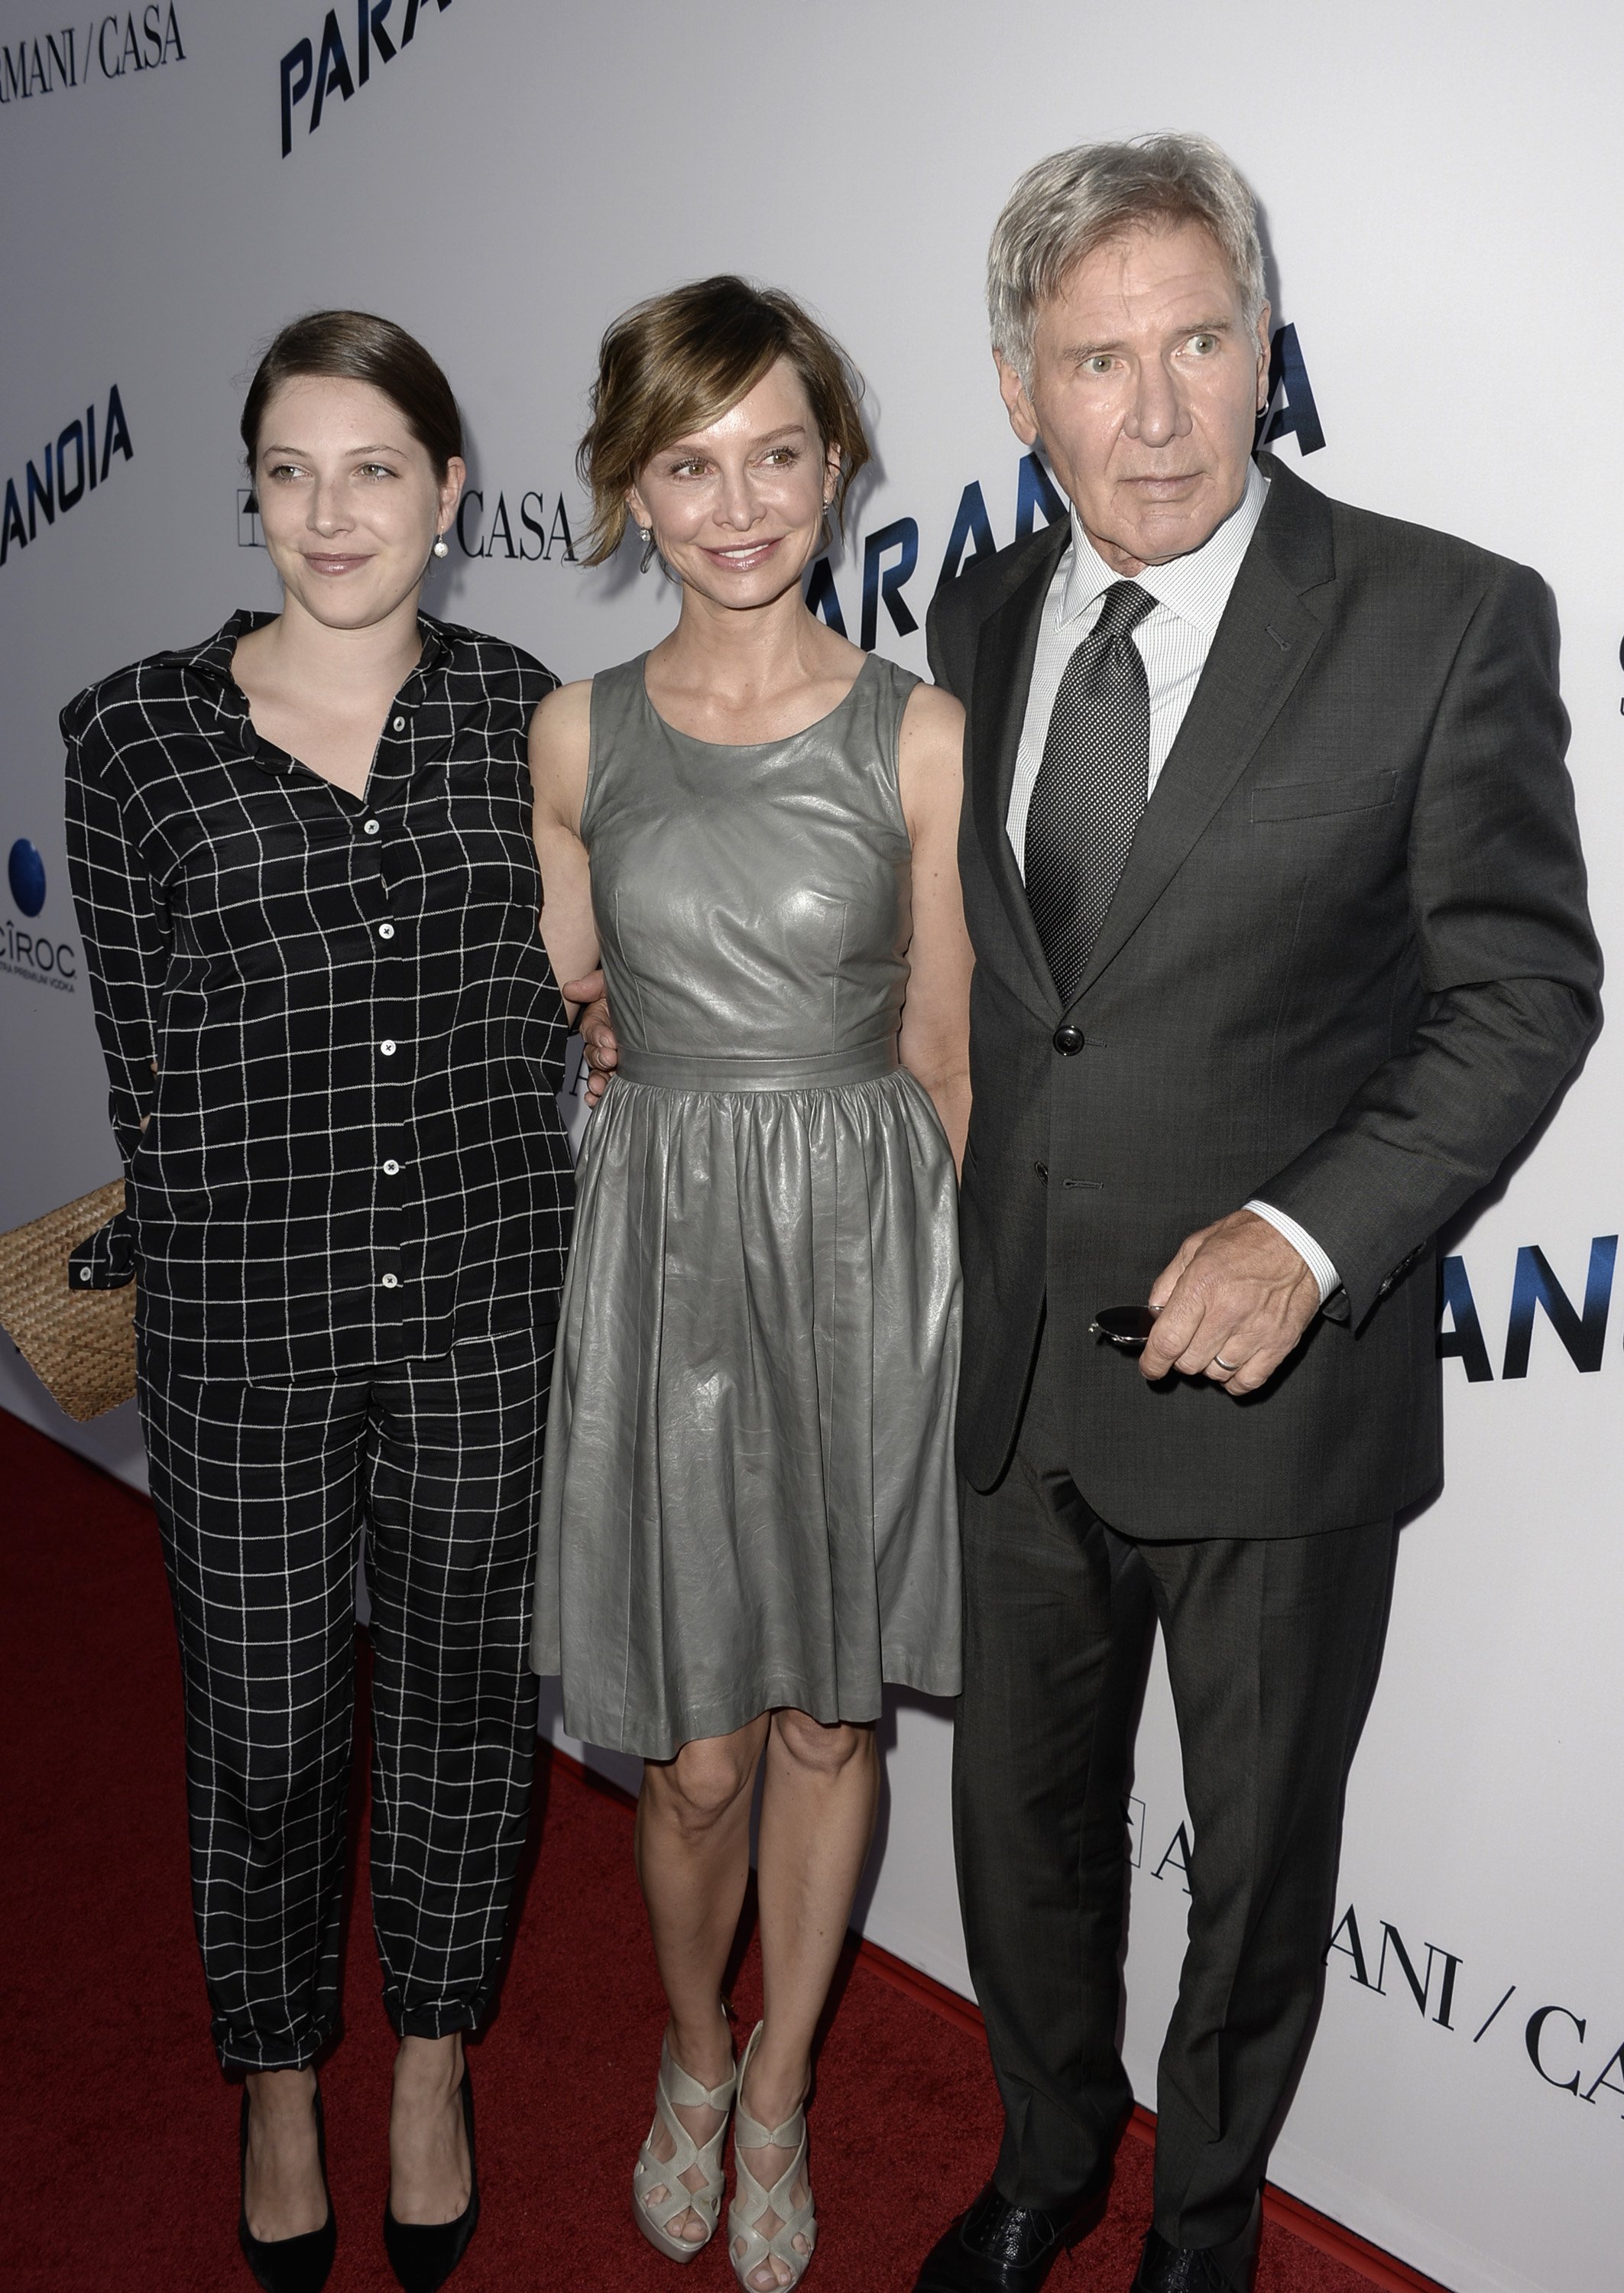 Georgia Ford, Calista Flockhart, and Harrison Ford attend the Relativity Media's "Paranoia" premiere at the DGA Theater on August 8, 2013, in Los Angeles, California. | Source: Getty Images